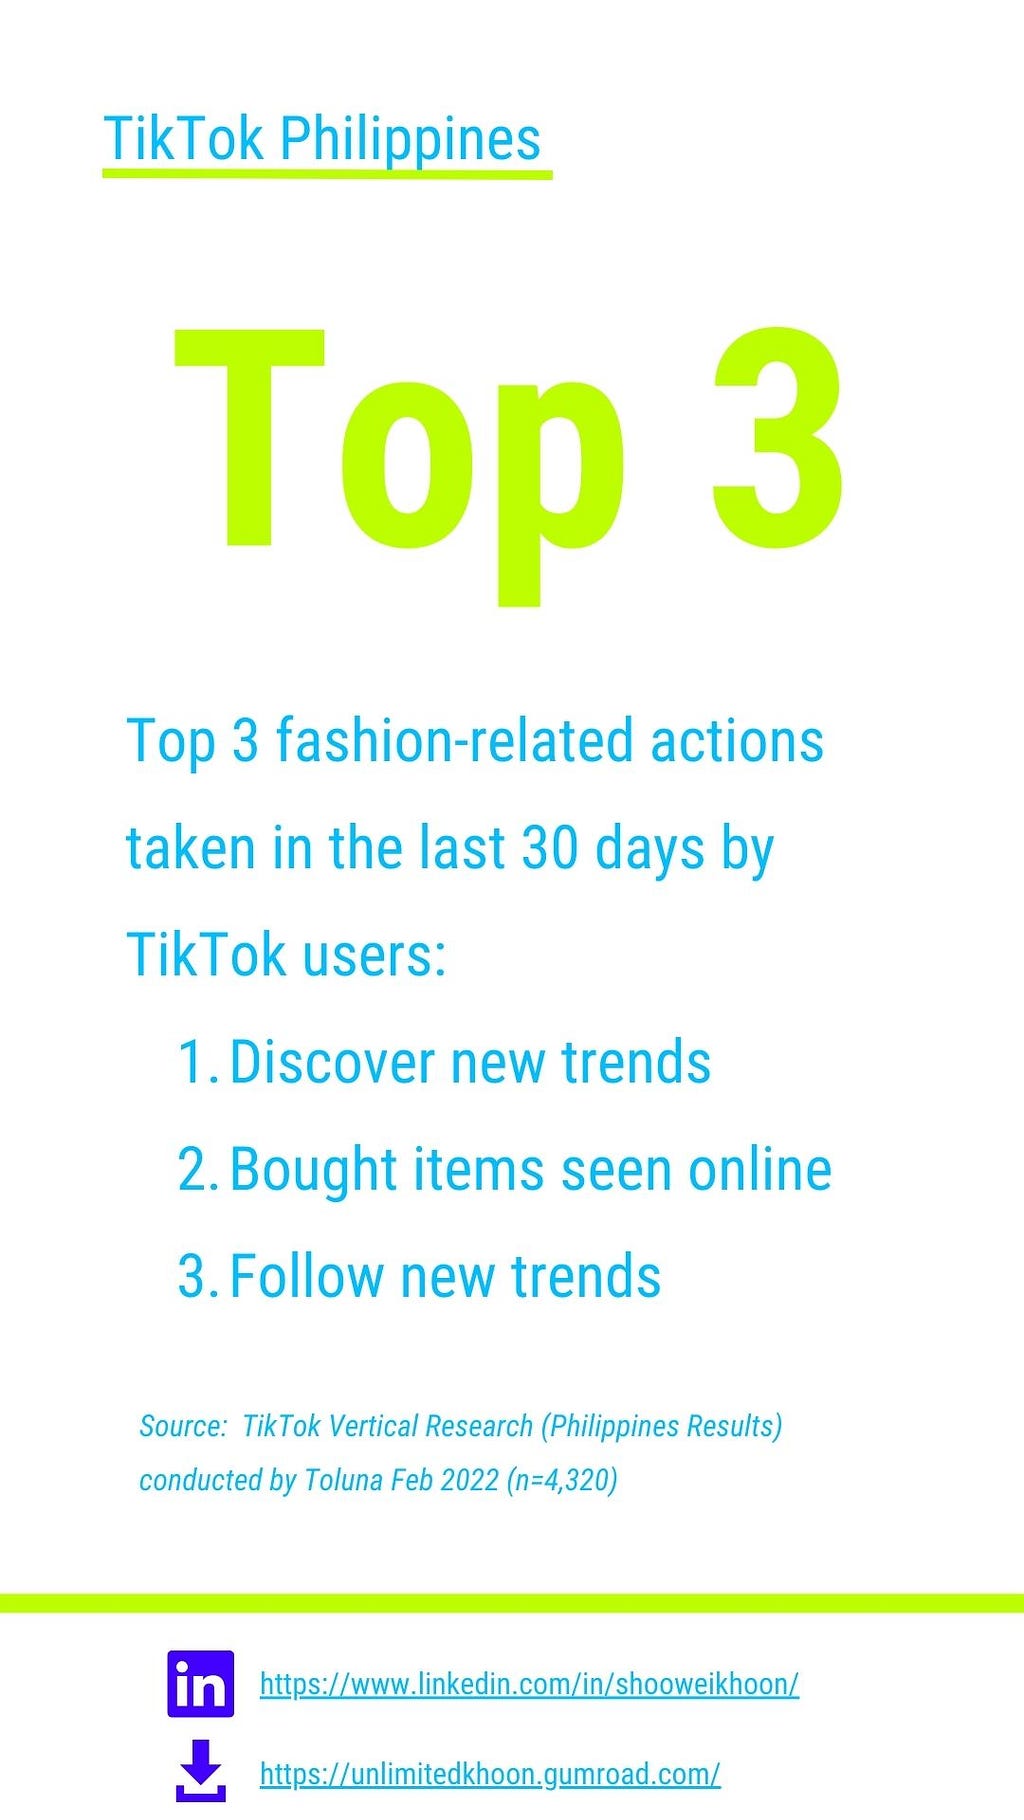 Top 3 fashion-related actions taken in the last 30 days by PH TikTok users